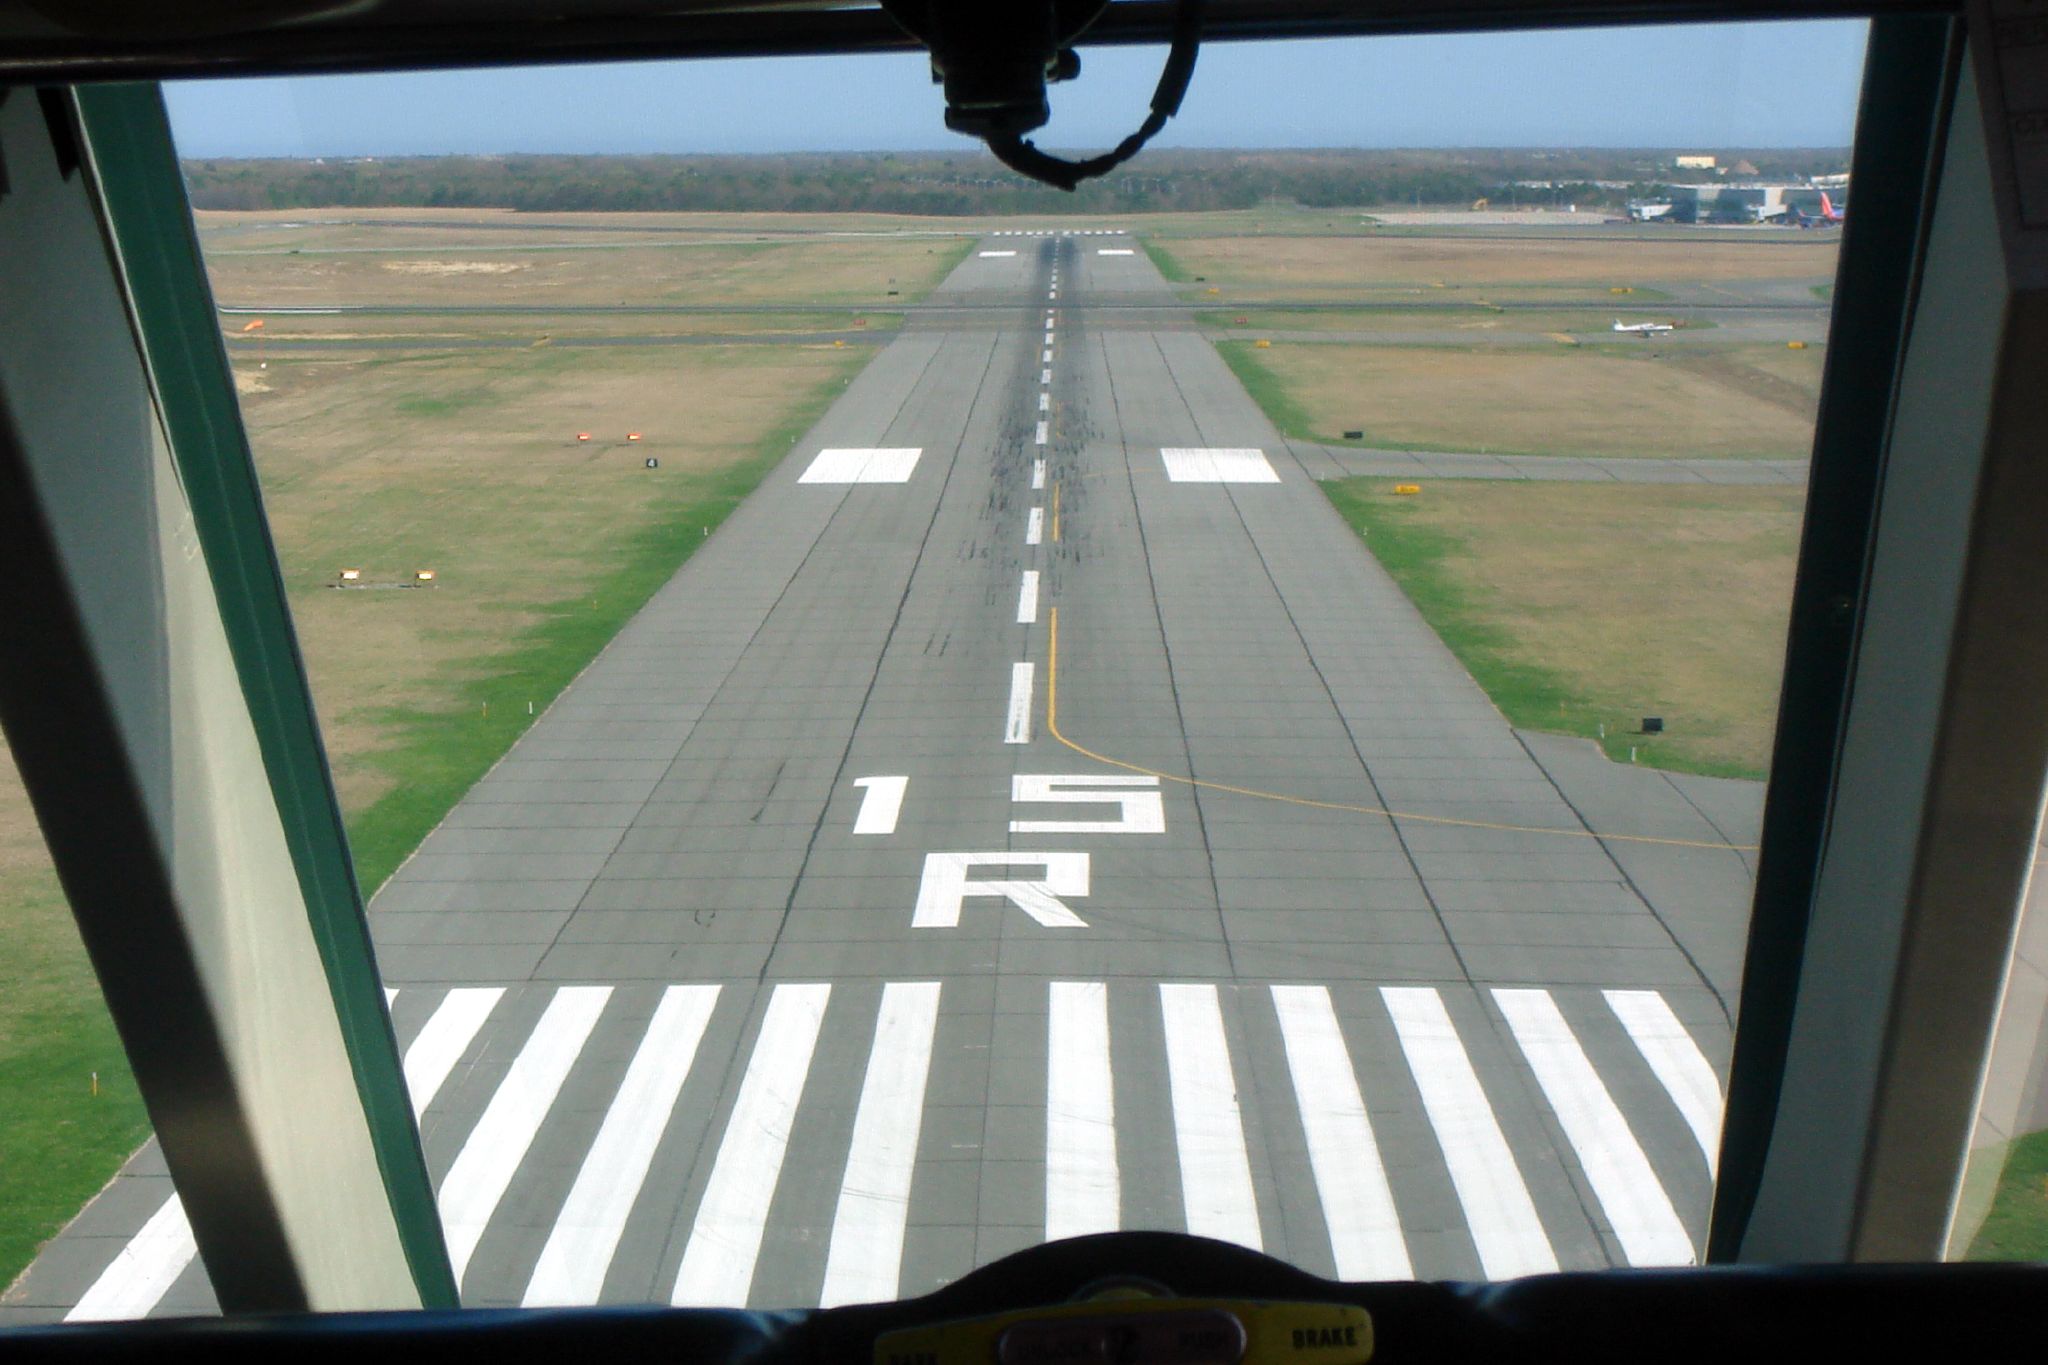 a view from an airplane, looking down at the runway